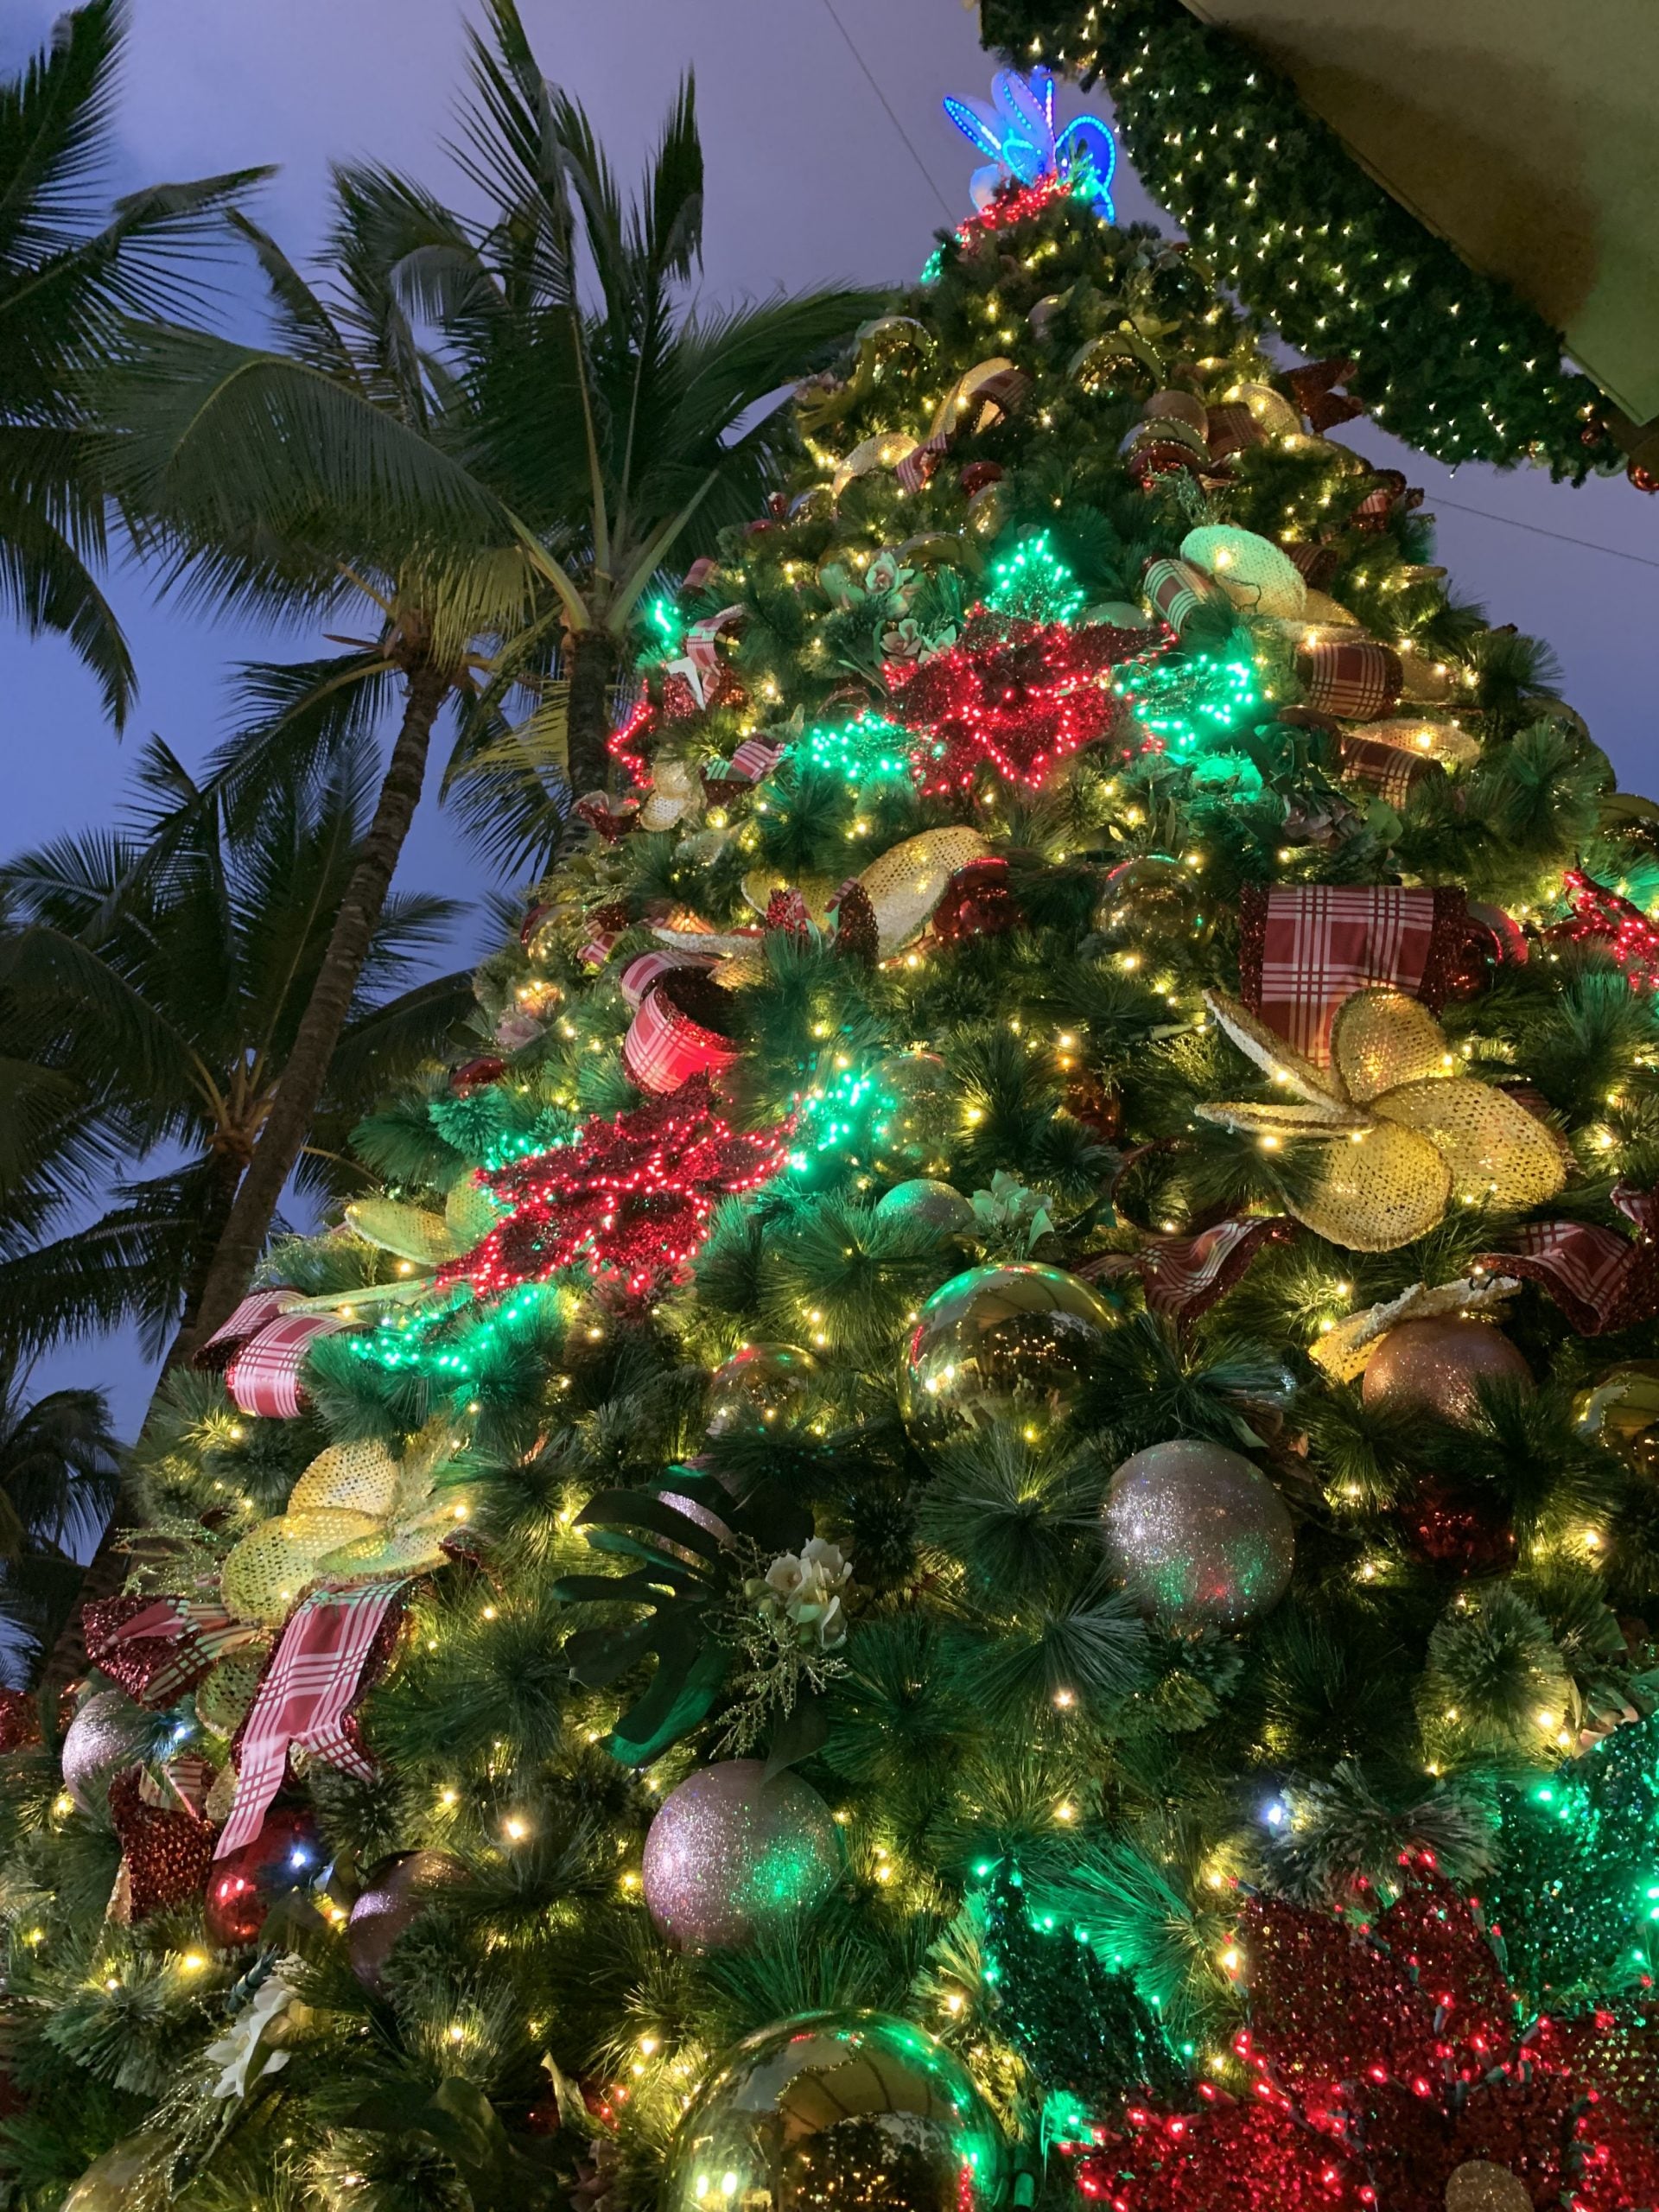 Holiday Events At Royal Hawaiian Center - Get in the holiday spirit with festive events for the whole family at Honolulu's Royal Hawaiian Center! | Royal Hawaiian Shopping Center - Christmas In Honolulu - Christmas Events Hawaii - Oahu Christmas Events #oahu #hawaii #royalhawaiiancenter